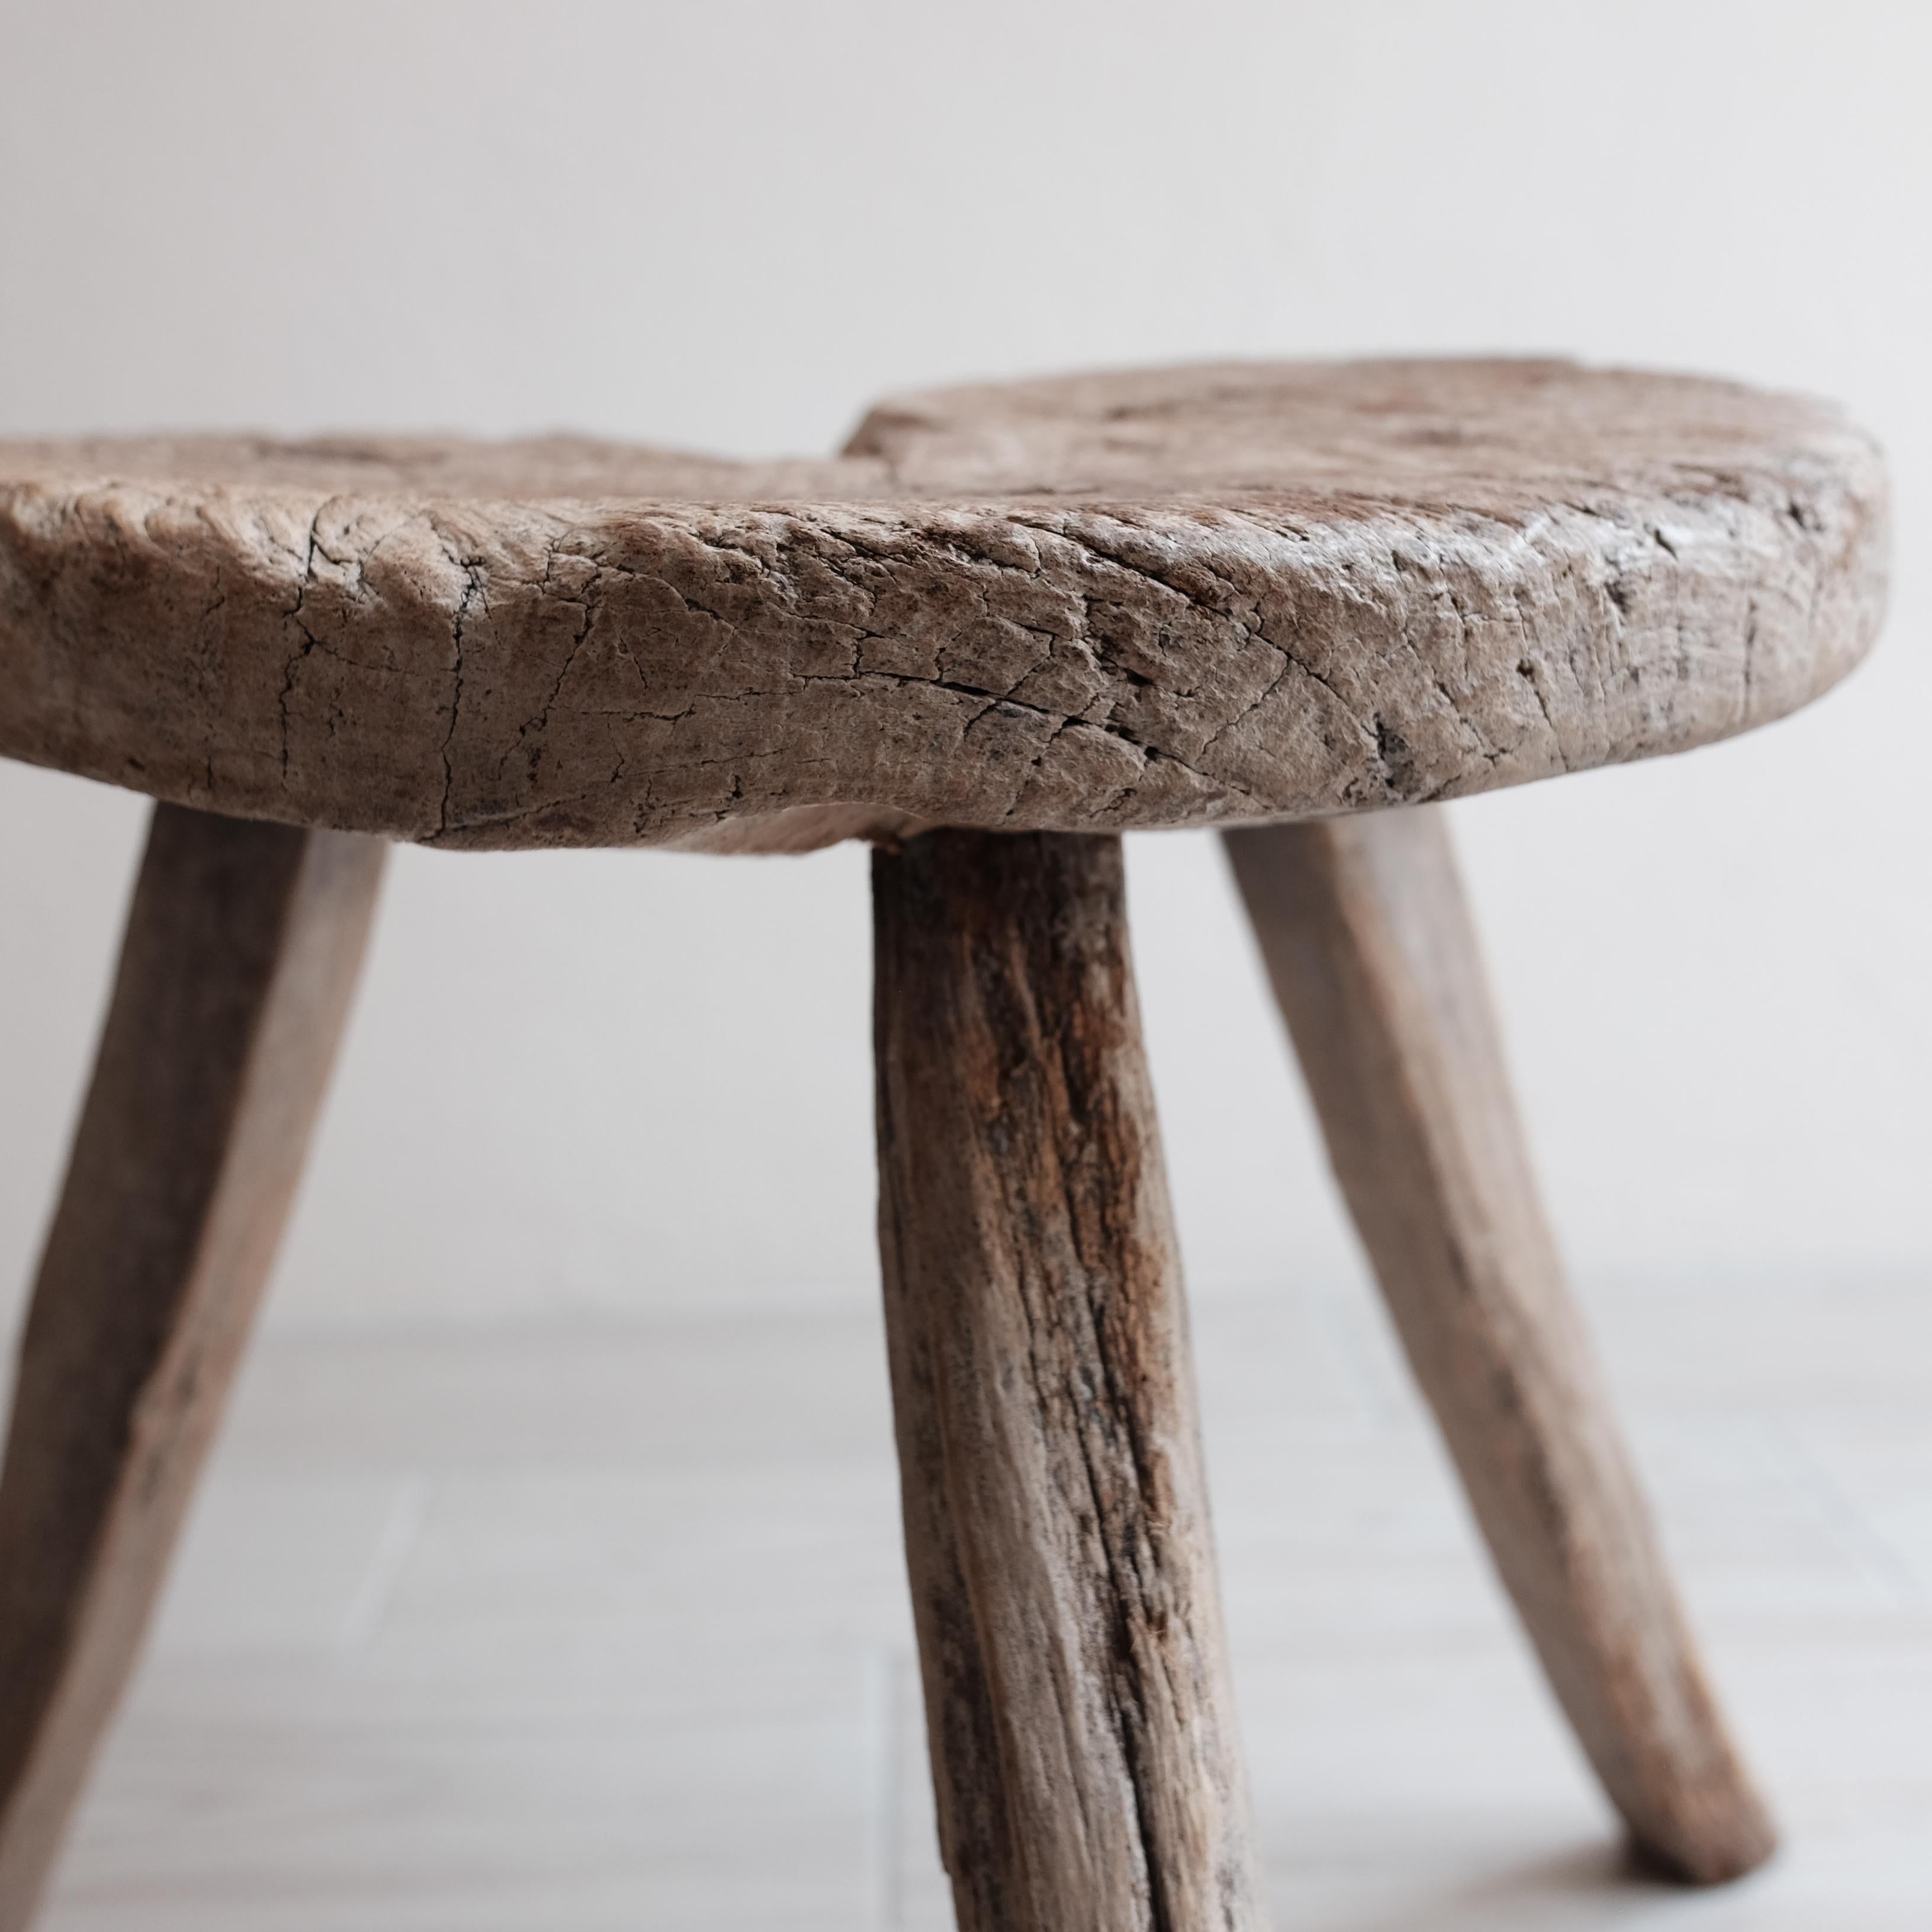 Hand carved mesquite stool from Guanajuato, Mexico. Incredible patina from age and wear. Primitive in style. Structurally sound despite partial fracture. Obtained from a private collection in San Miguel de Allende.